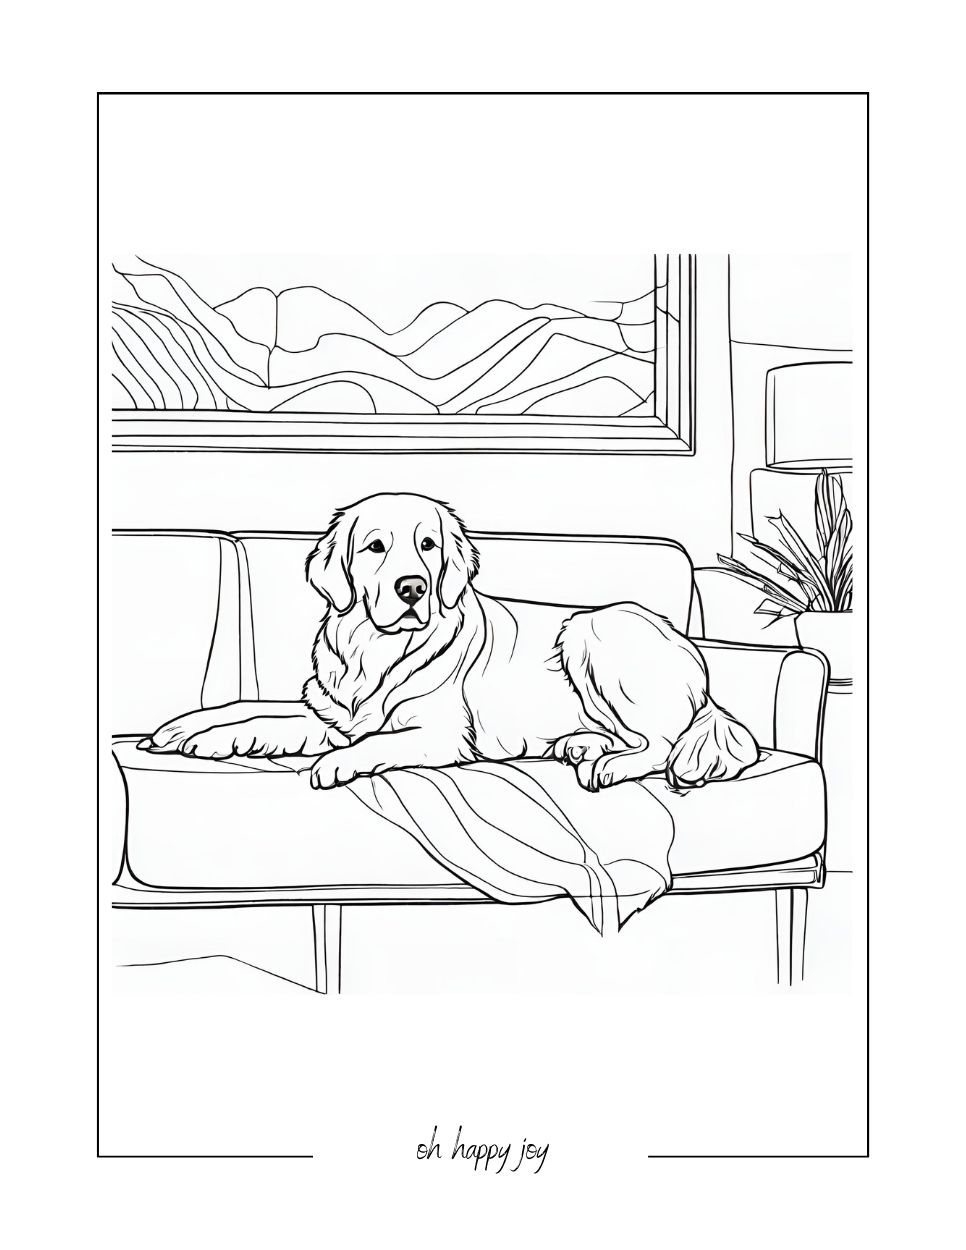 golden retriever at home coloring page